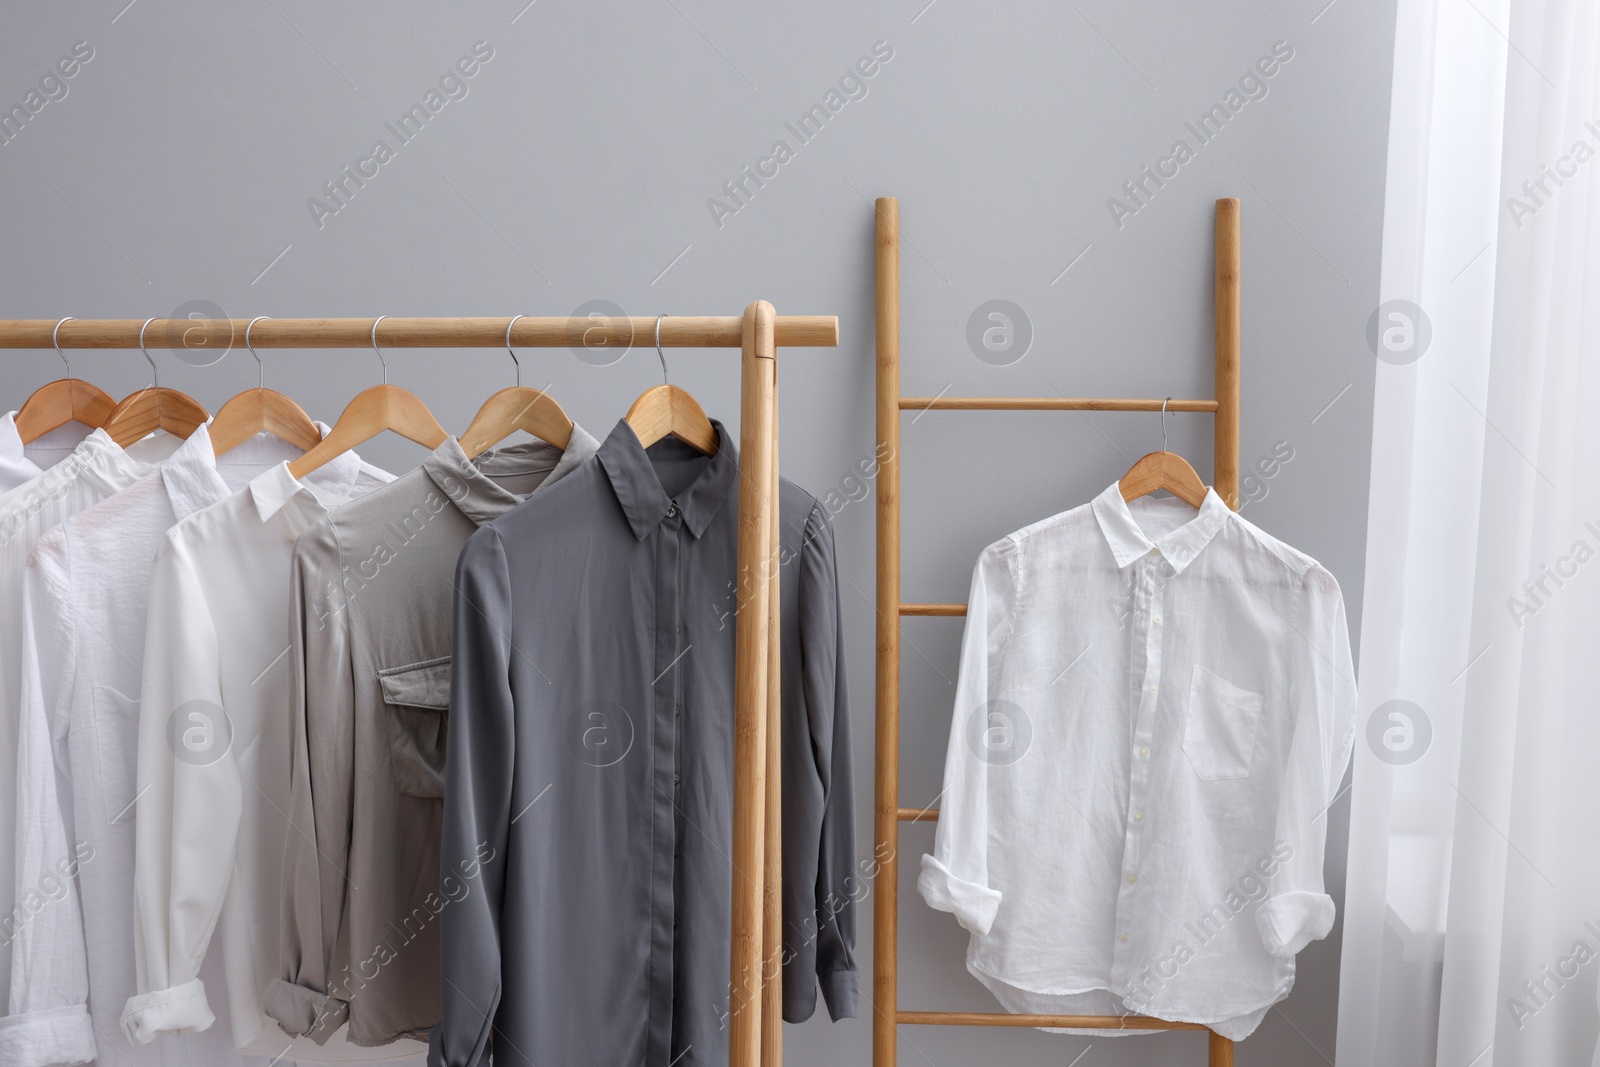 Photo of Different stylish shirts hanging on ladder and rack near grey wall in room. Organizing clothes